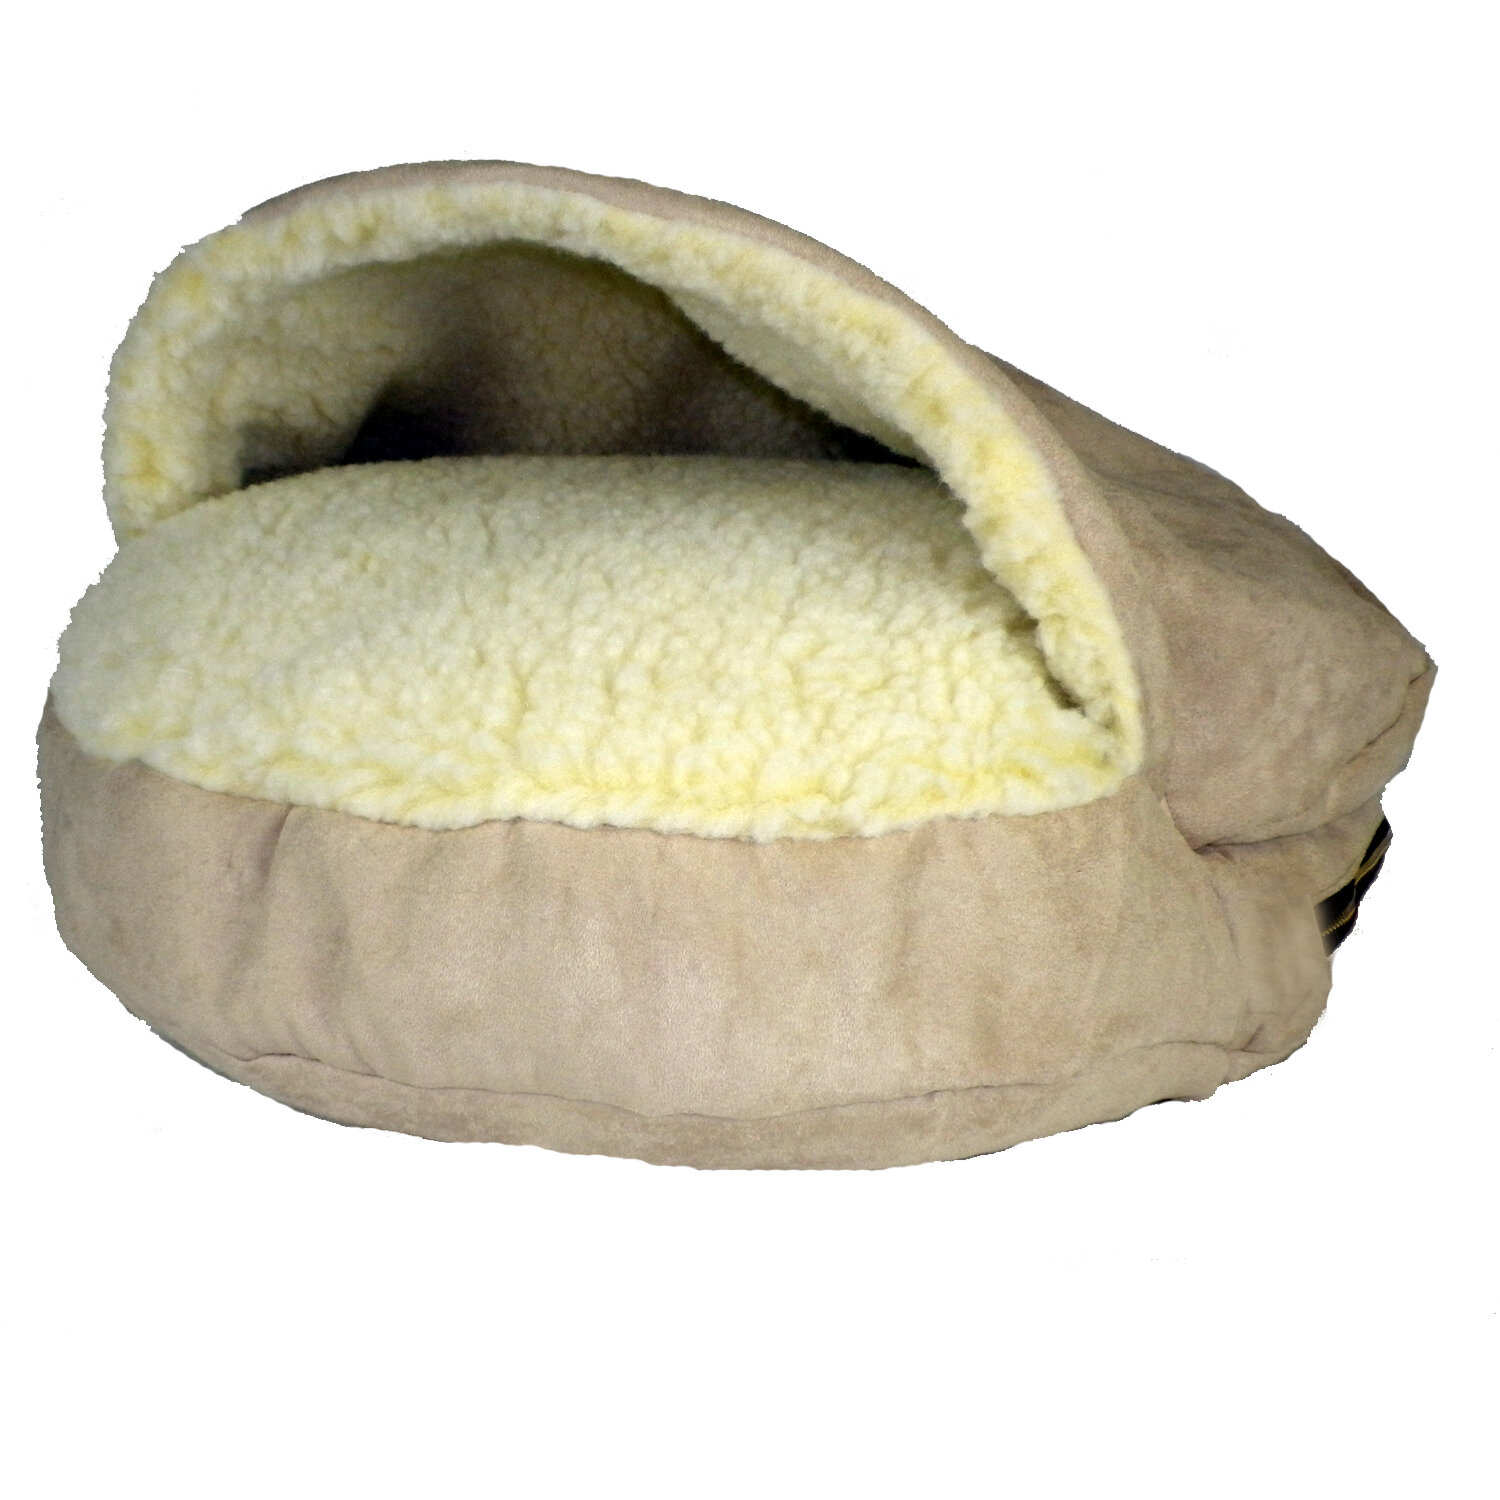 Coffee Csatai Dog Cave Bed,Pet Nest Dog Bed Cave Winter Warm Cashmere 64cm Large Sleeping Bag Pet Supplies Universal Detachable Washable House for Big Dog Cat Puppy Rabbit 